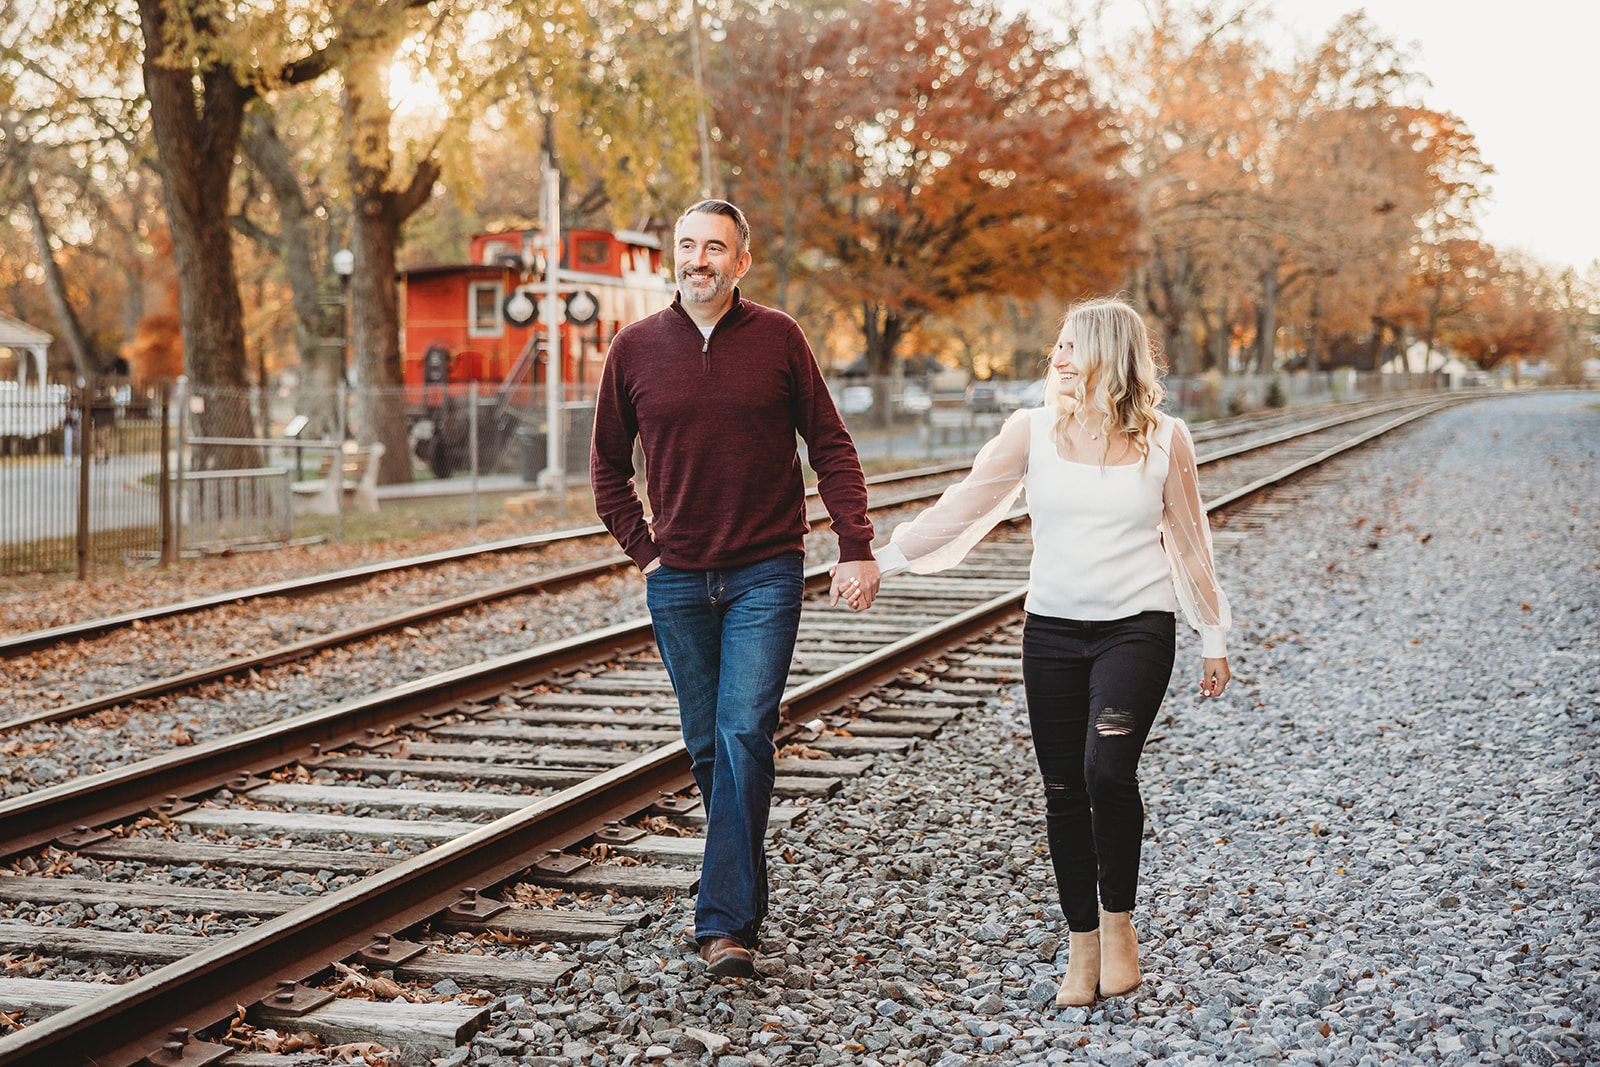 outdoor fall engagement session at Lititz Springs Park in central Pennsylvania Wilbur Buds railroad tracks